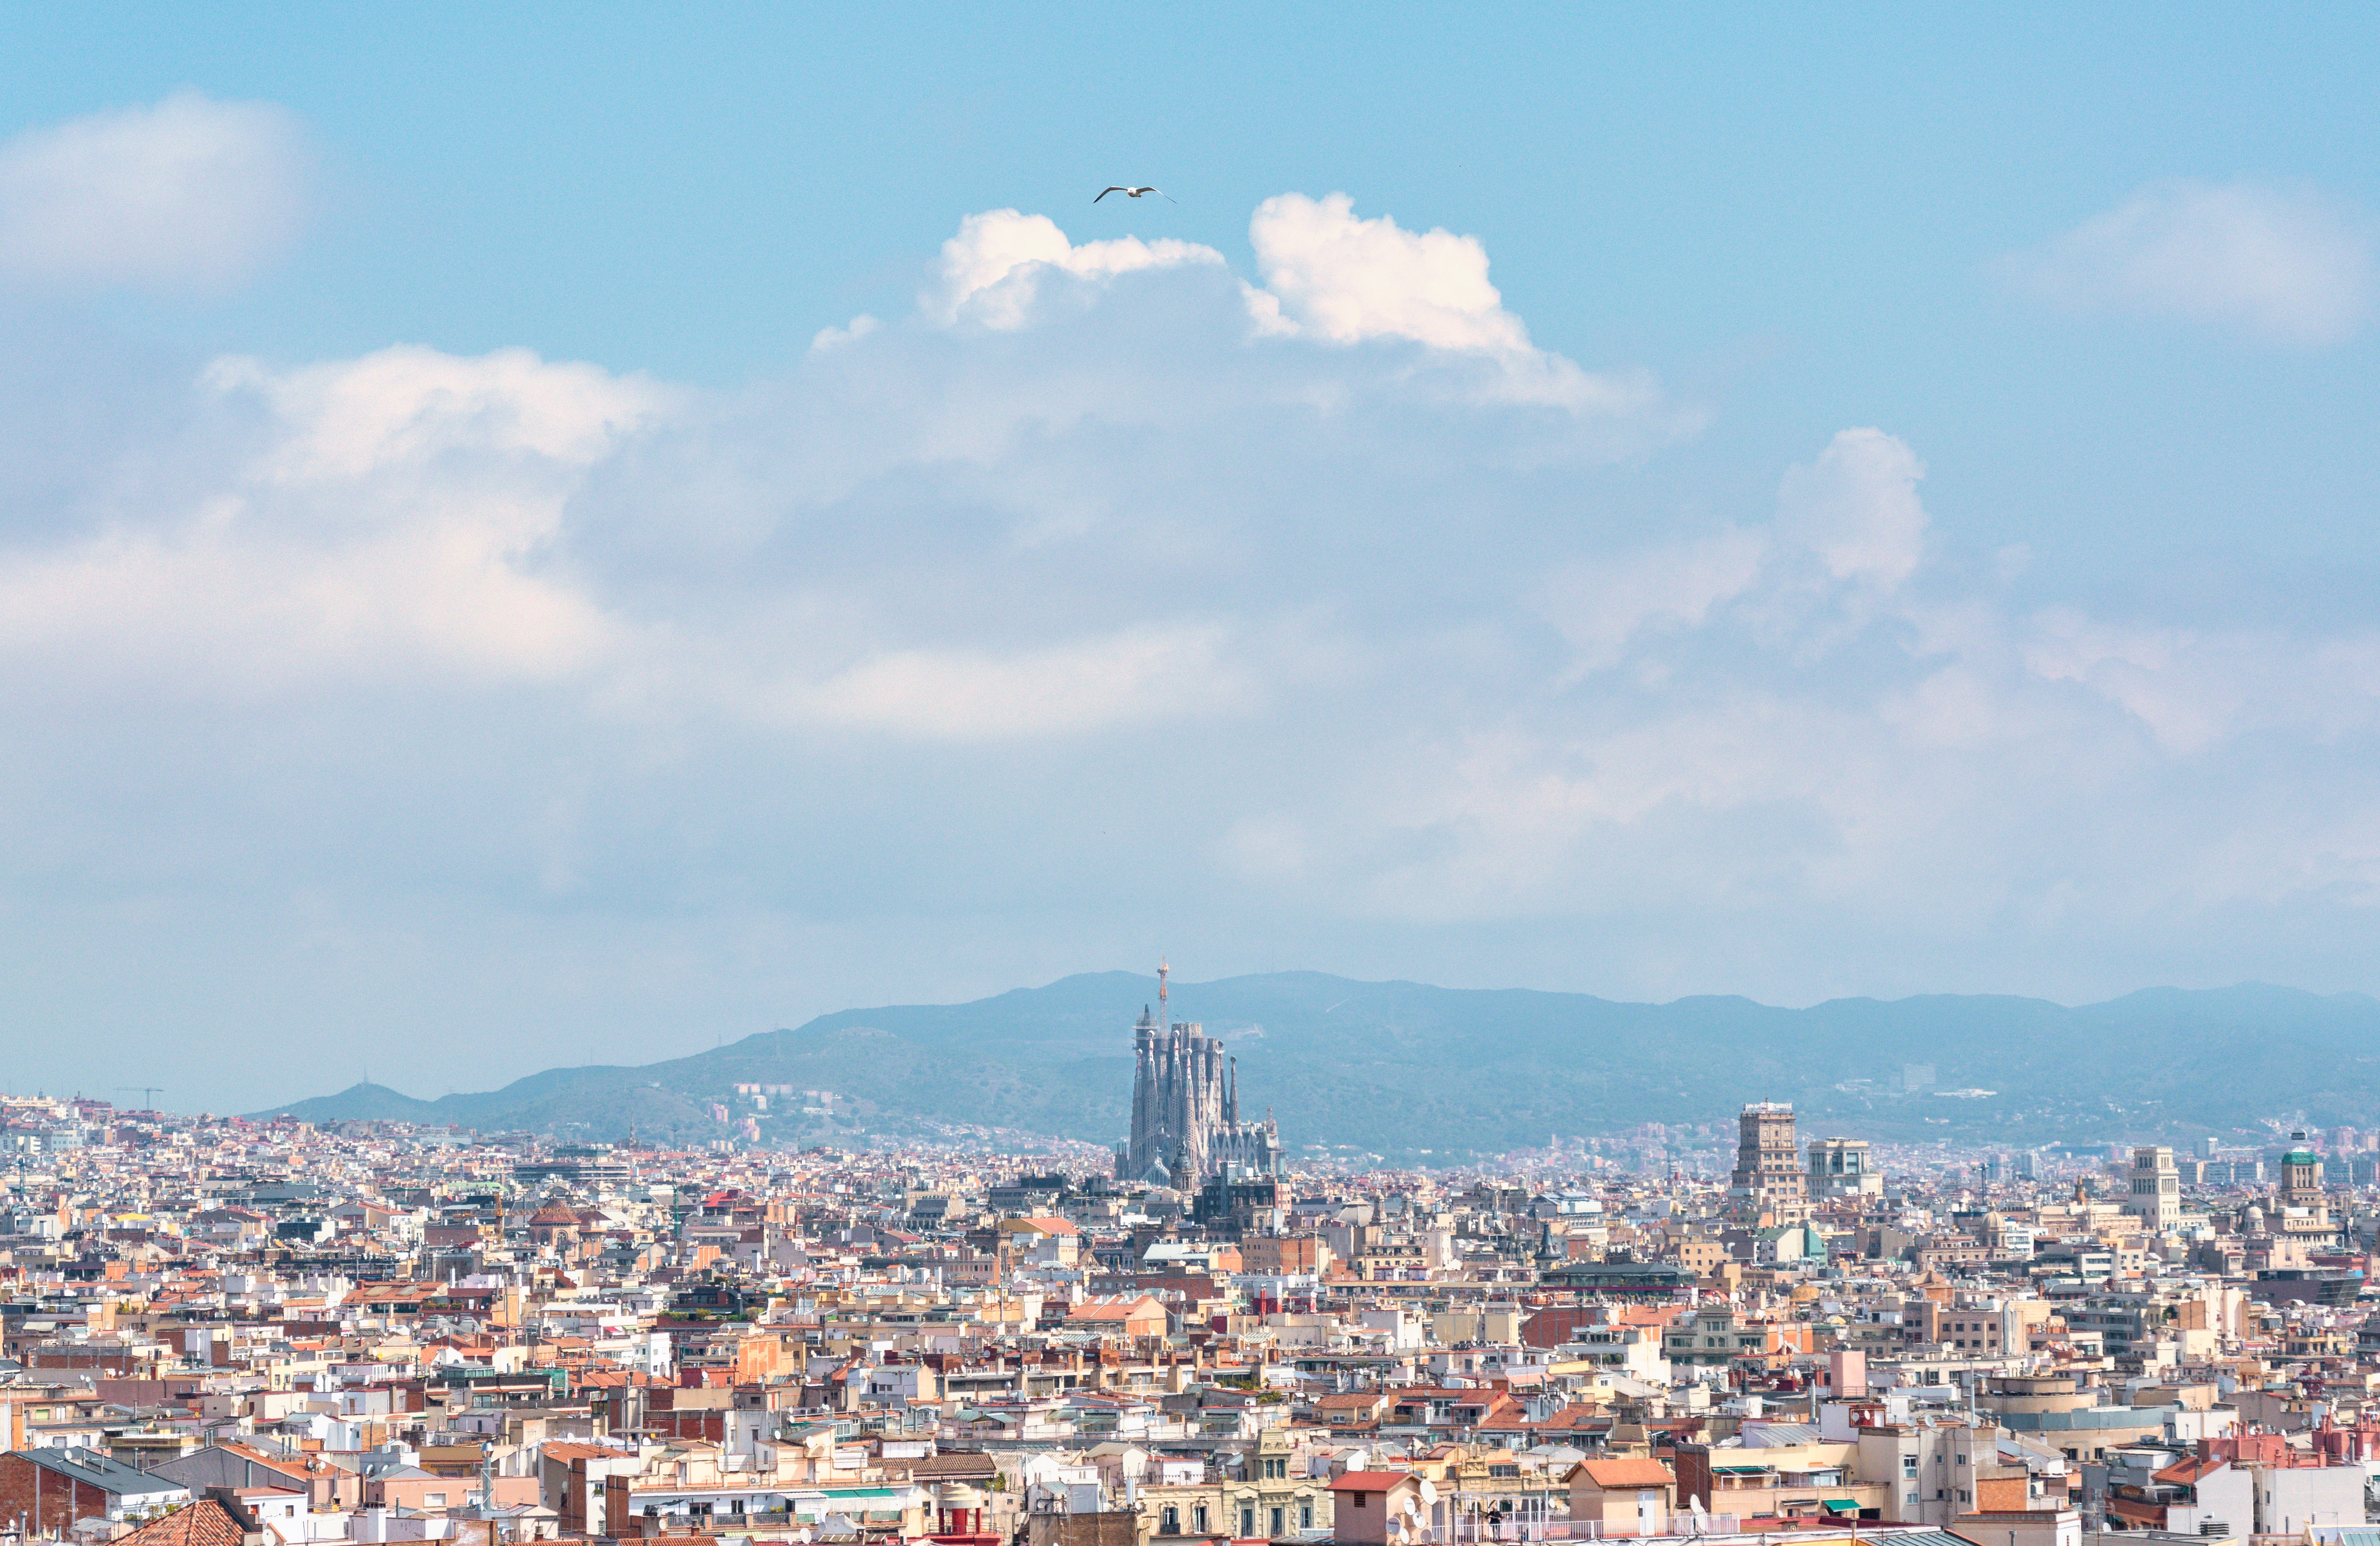 Immerse Yourself Into the Barcelona Culture This Weekend